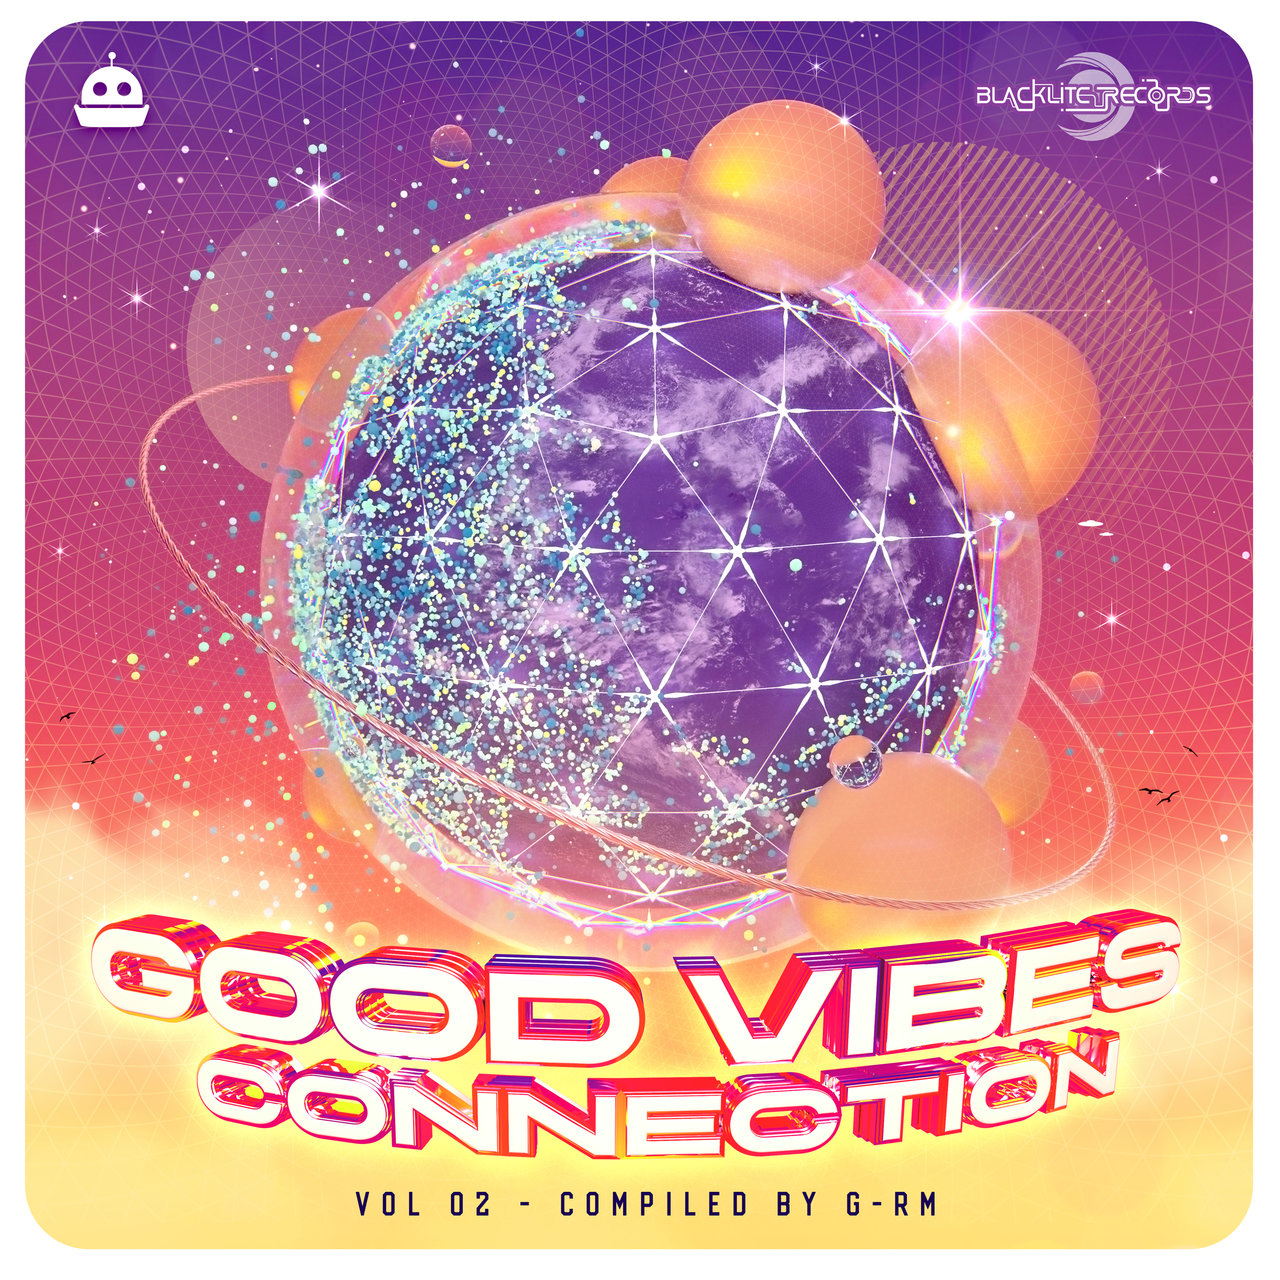 Good Vibes Connection, Vol 02 (Compiled by G-RM) - AAVV